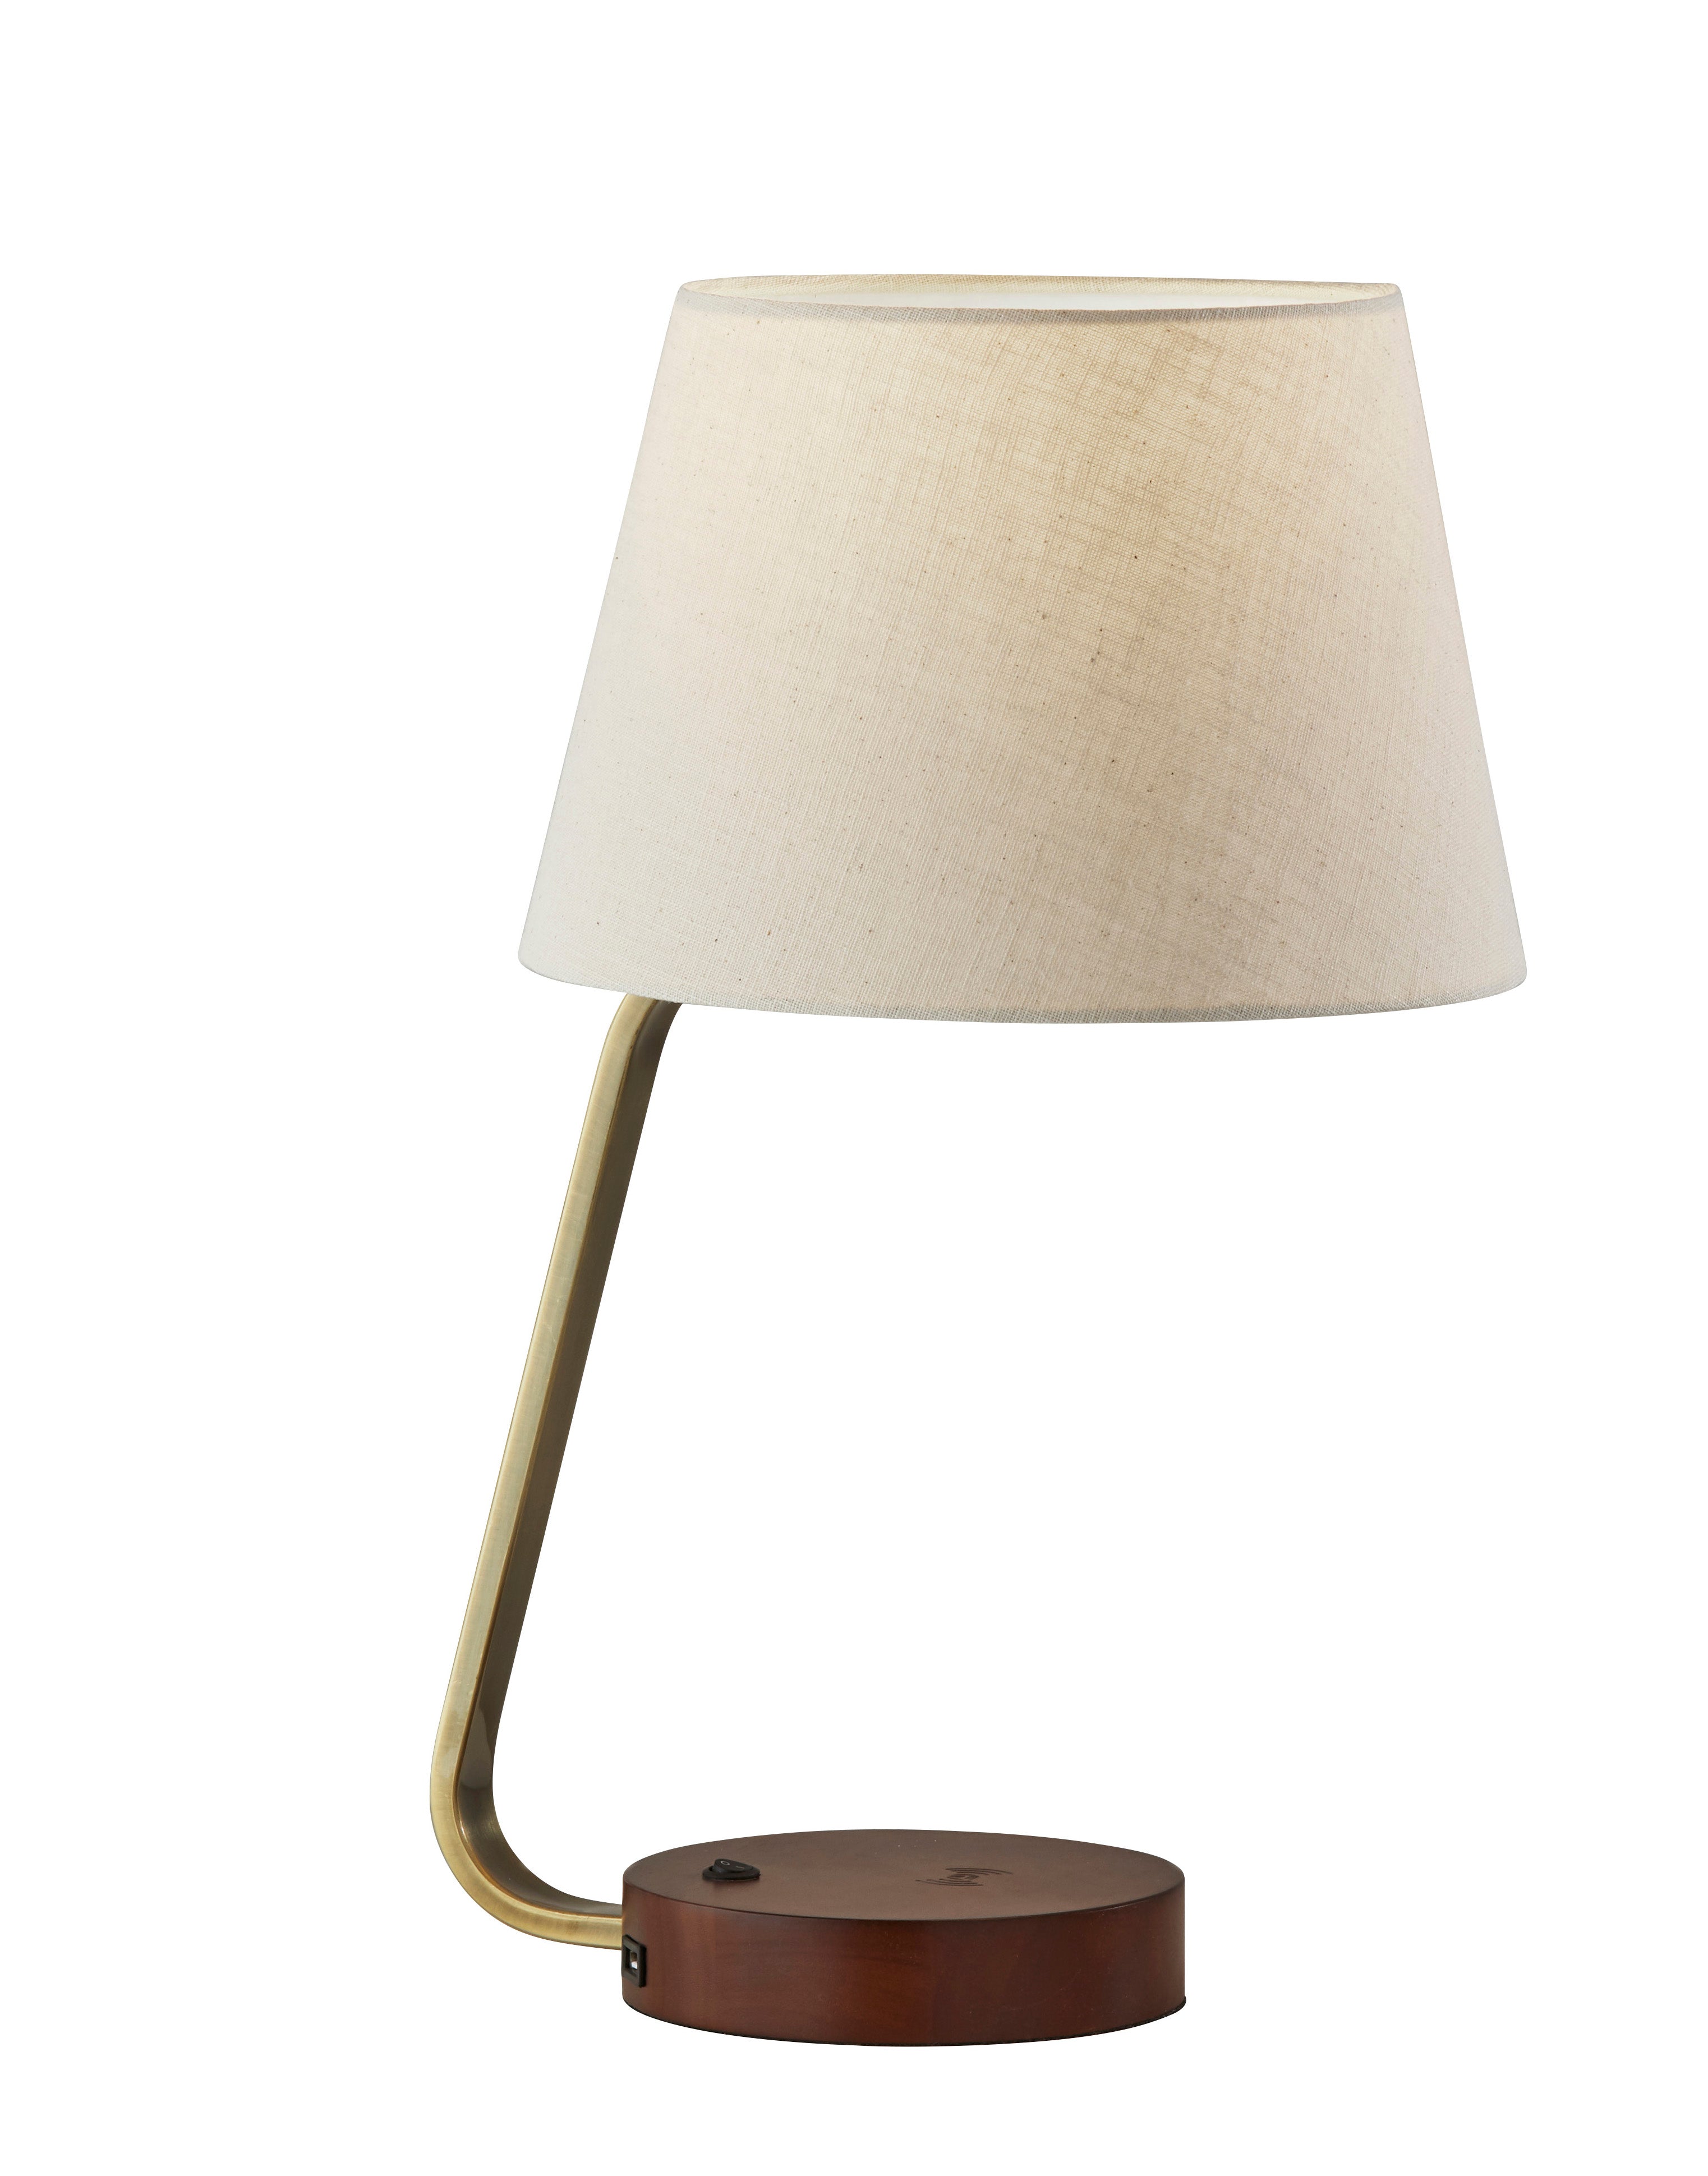 LOUIE Table lamp Gold, Wood - 3015-21 | ADESSO